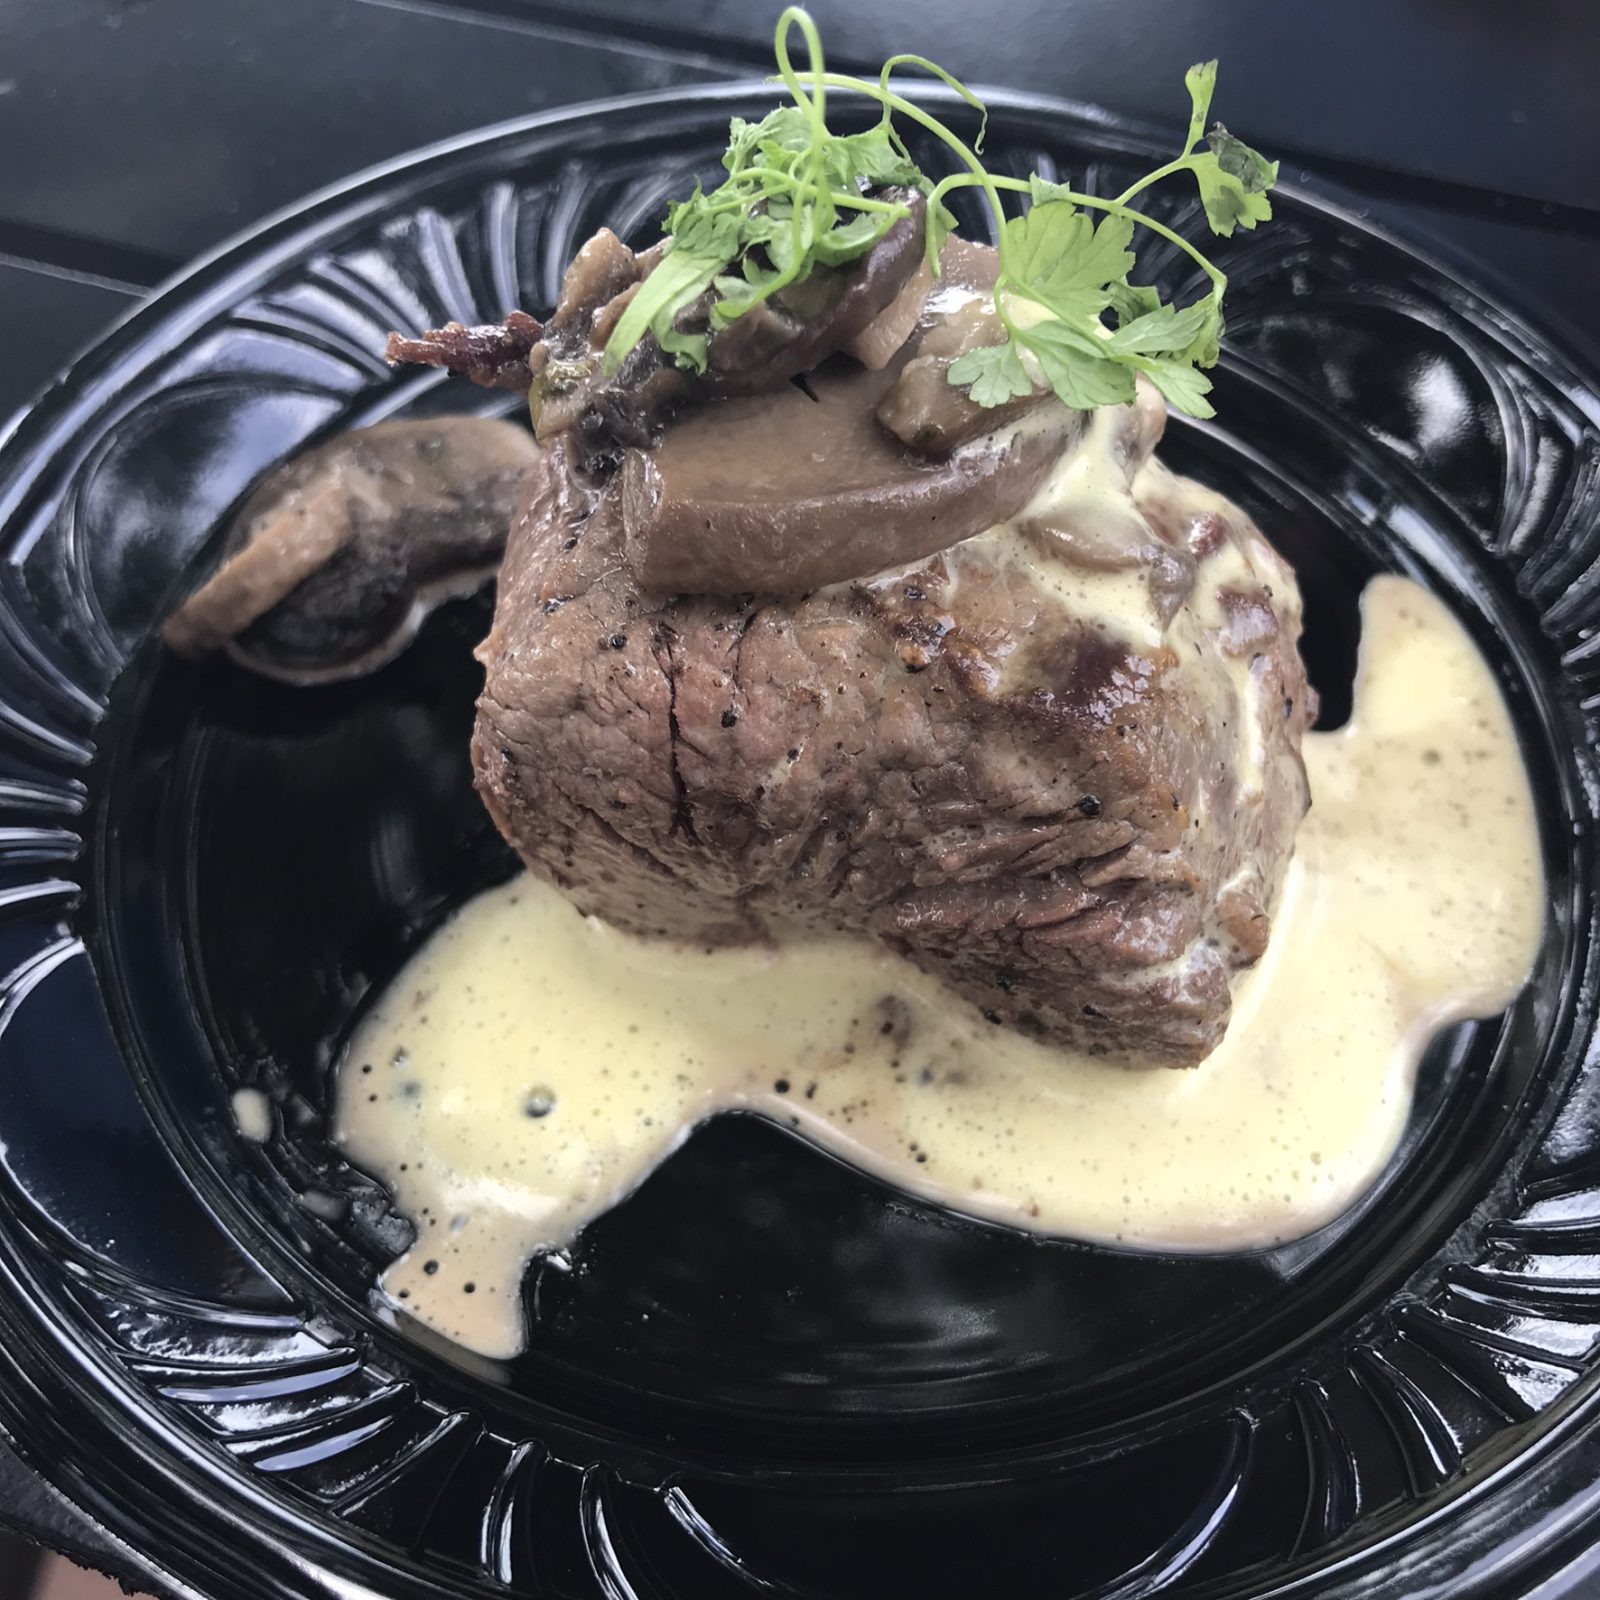 Filet Mignon with Truffle Butter Sauce from epcot food and wine festival